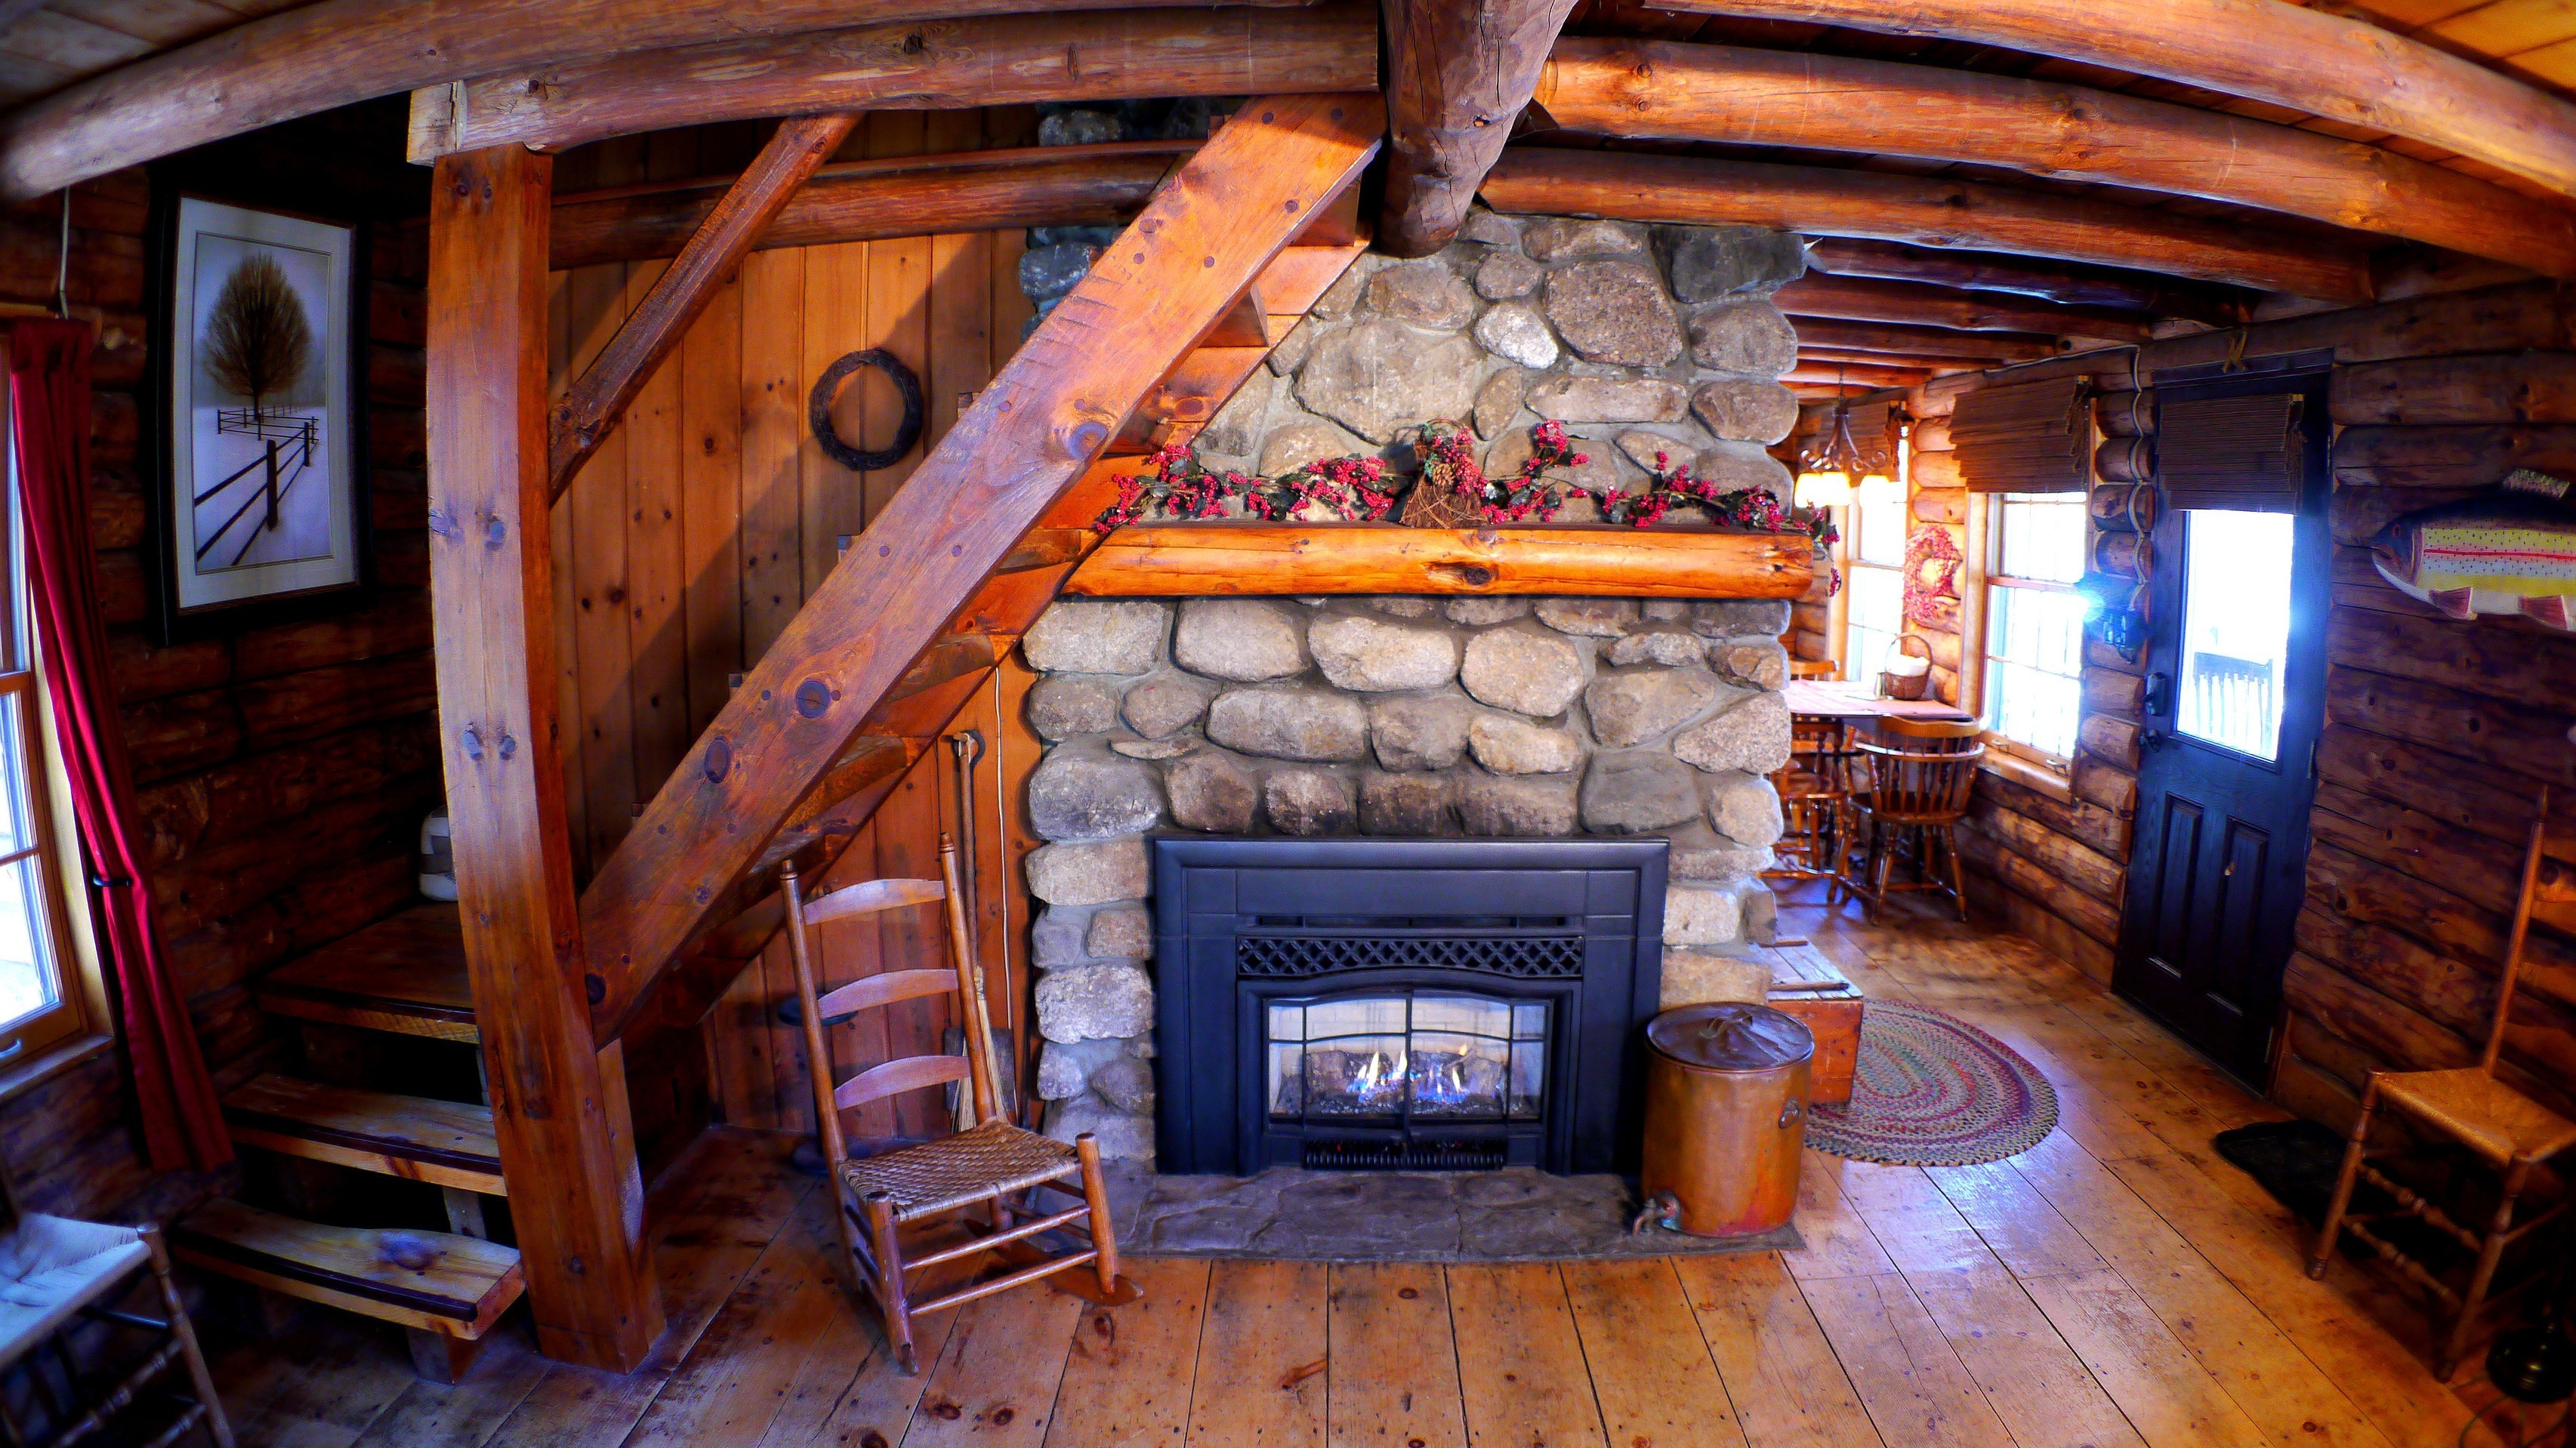 Top spots for cheap cabin rentals in the South   Vrbo